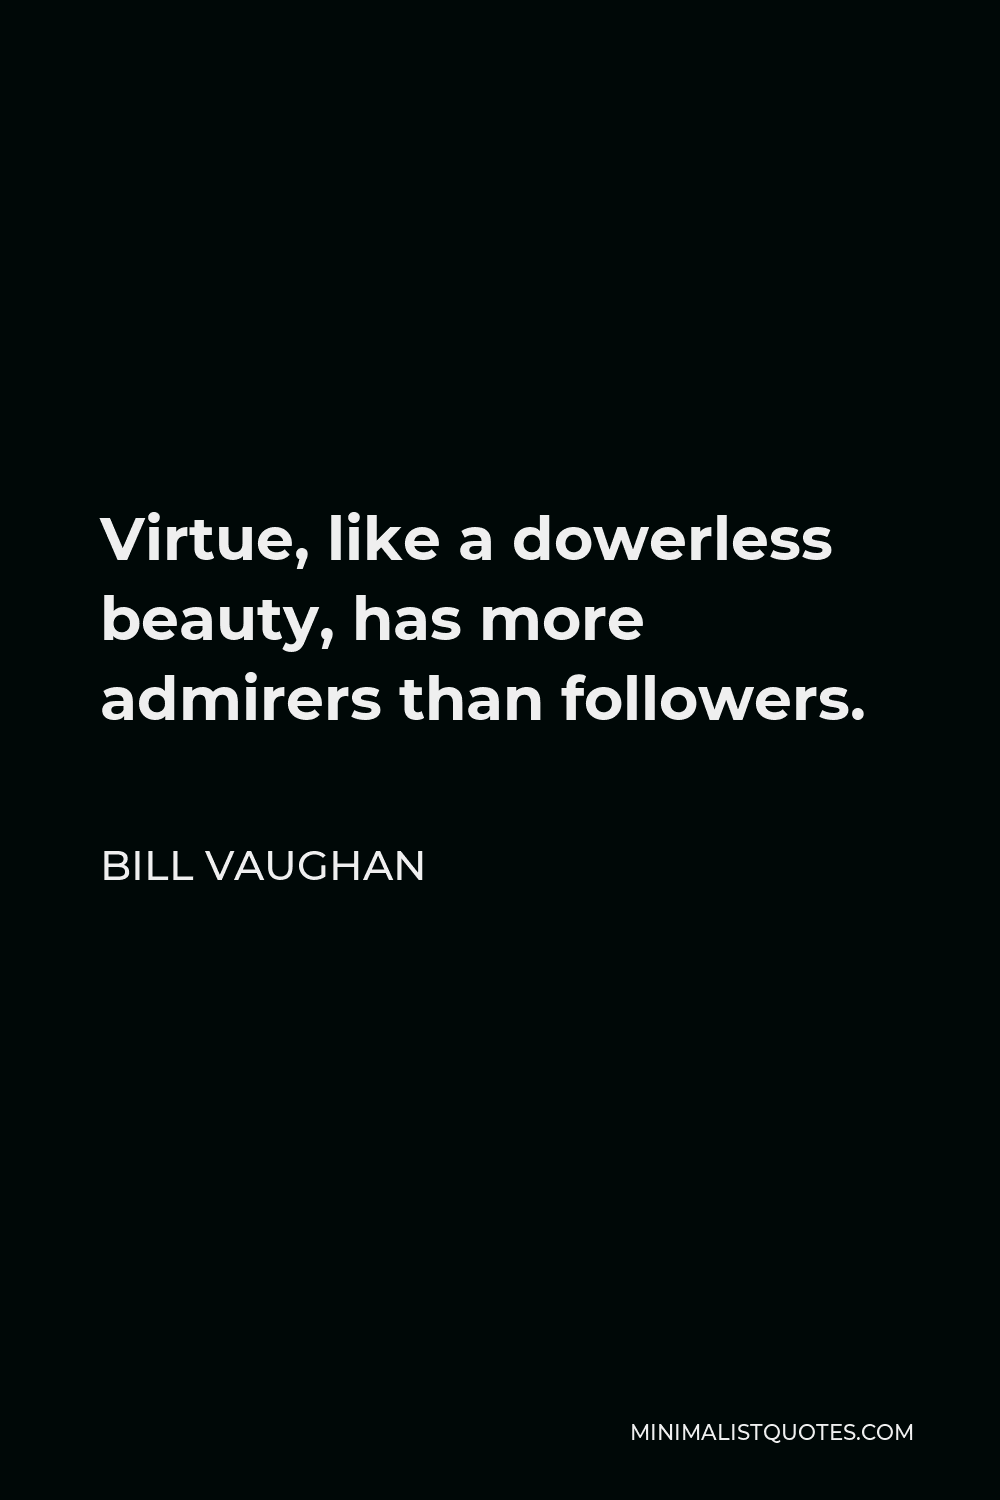 Bill Vaughan Quote - Virtue, like a dowerless beauty, has more admirers than followers.